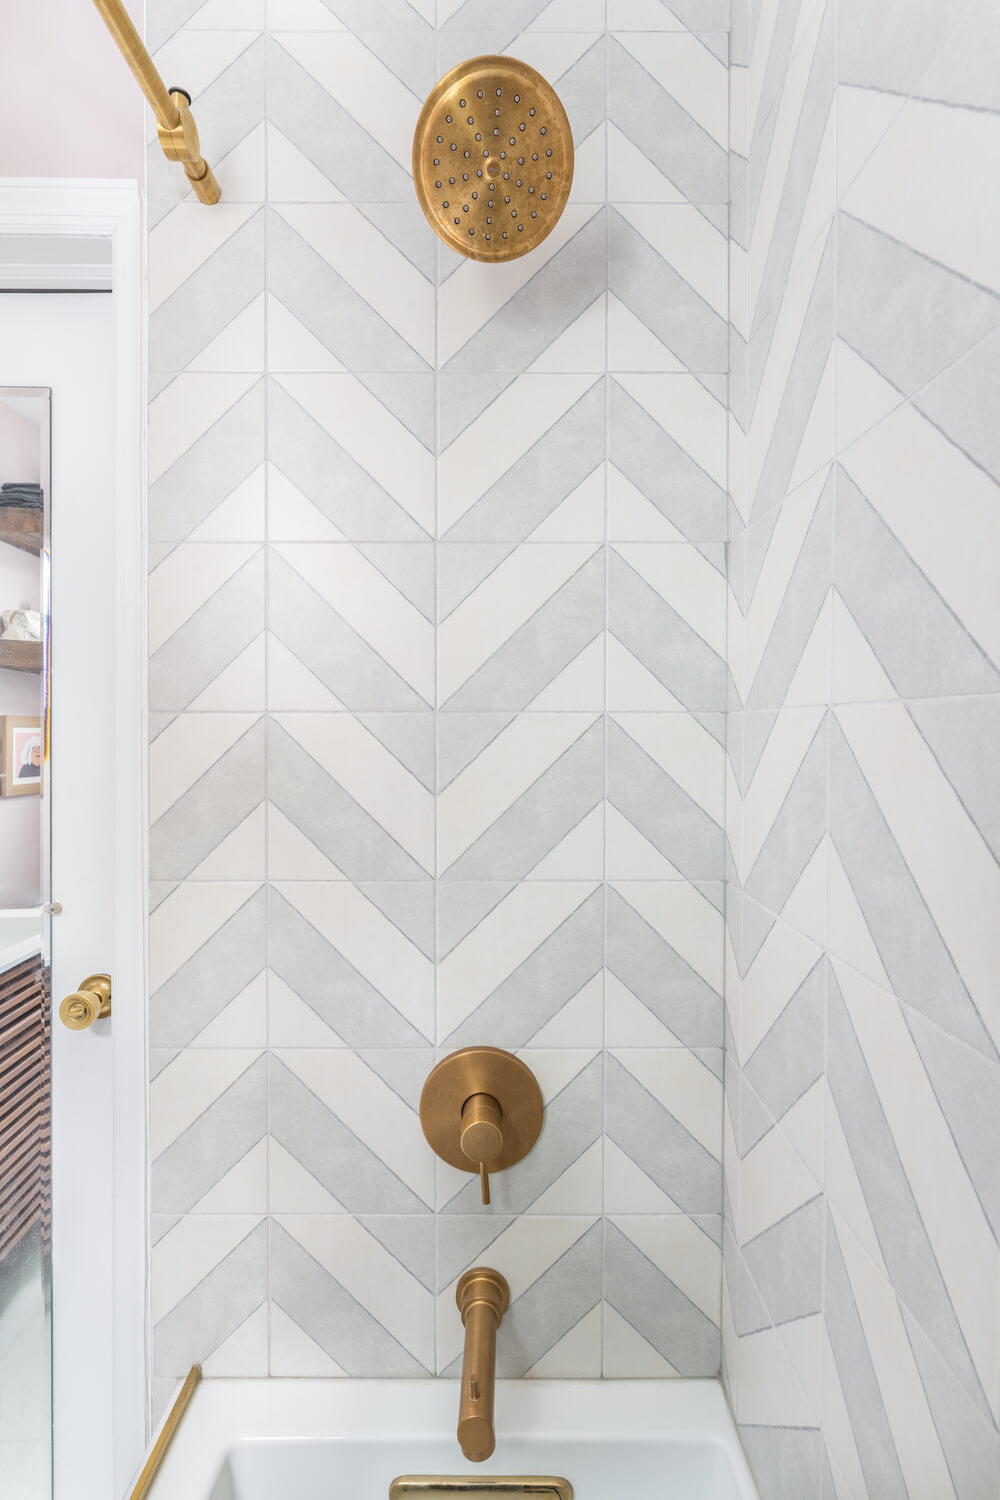 Inside the chevron tiled shower with bronze hardware